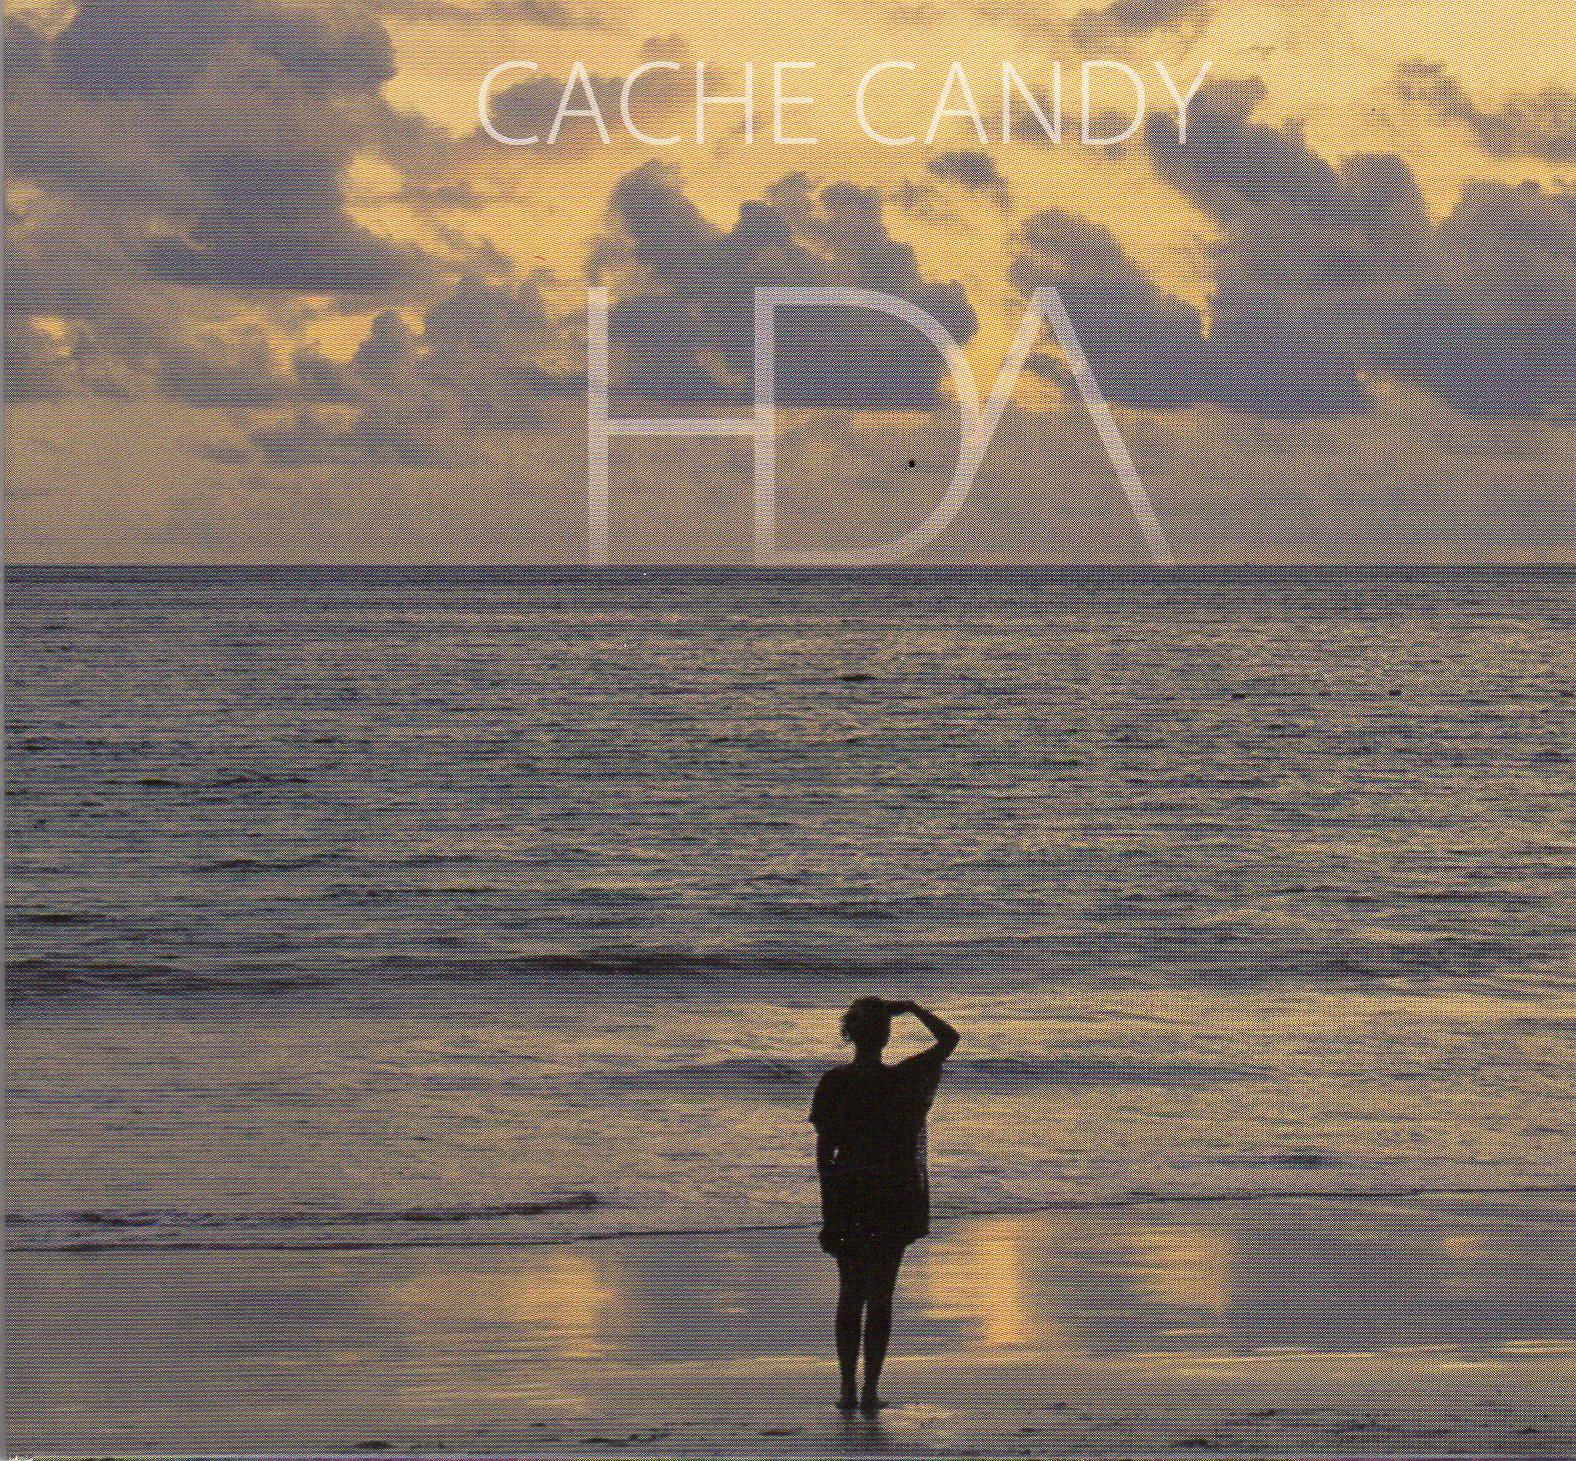 Cache Candy - HDA (Hiver des Airs)